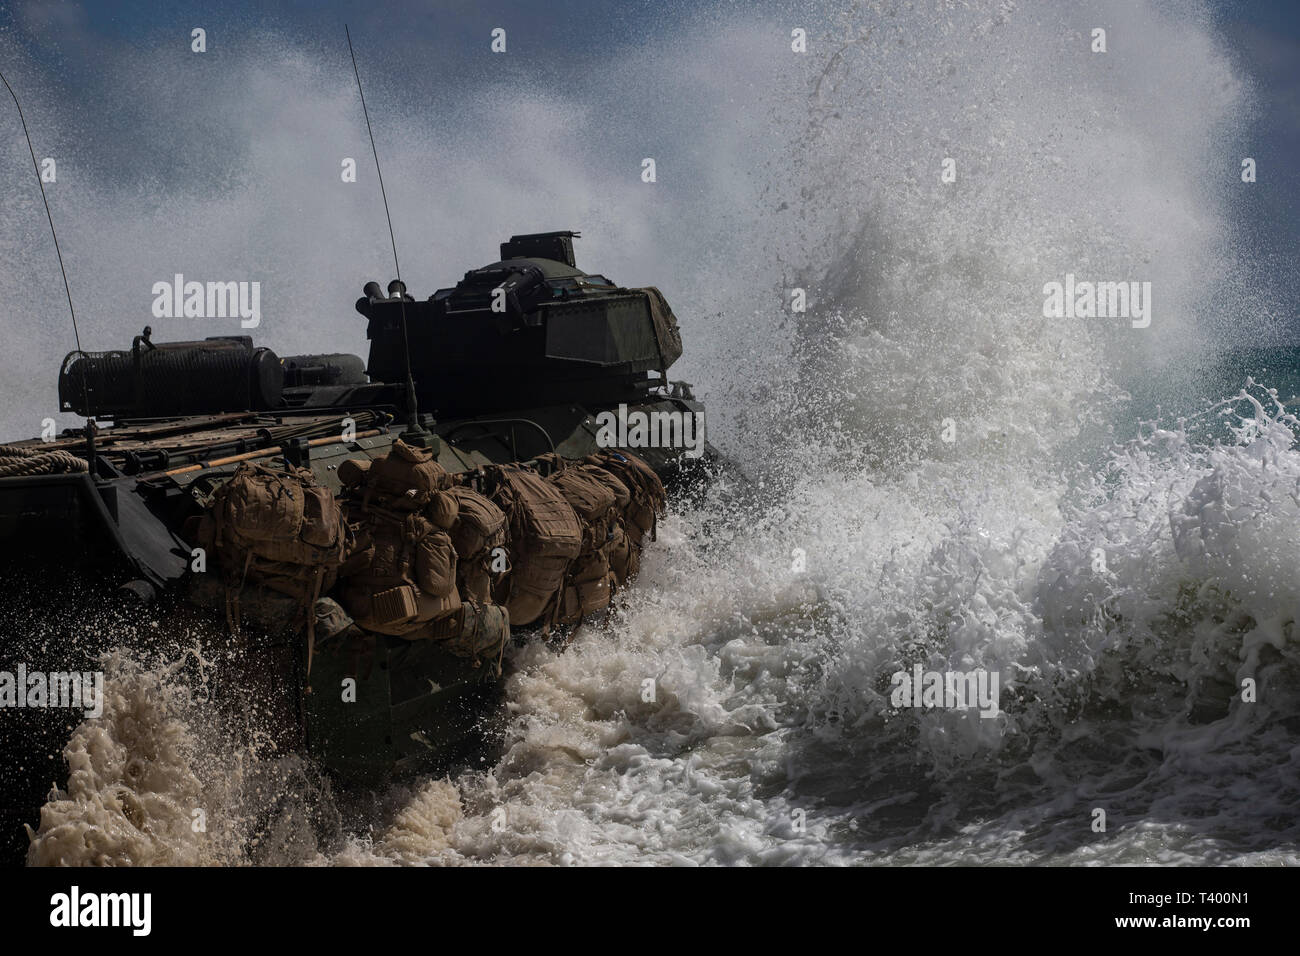 A U.S. Marine Corps amphibious assault vehicle assigned to Combat Assault Company, 3d Marine Regiment, crashes into the tides during an amphibious assault exercise at Marine Corps Training Area Bellows, Marine Corps Base Hawaii, Apr. 9, 2019. The unit conducted a simulated beach assault to improve their lethality and cooperation, as a mechanized unit and force in readiness. (U.S. Marine Corps photo by Sgt. Alex Kouns) Stock Photo